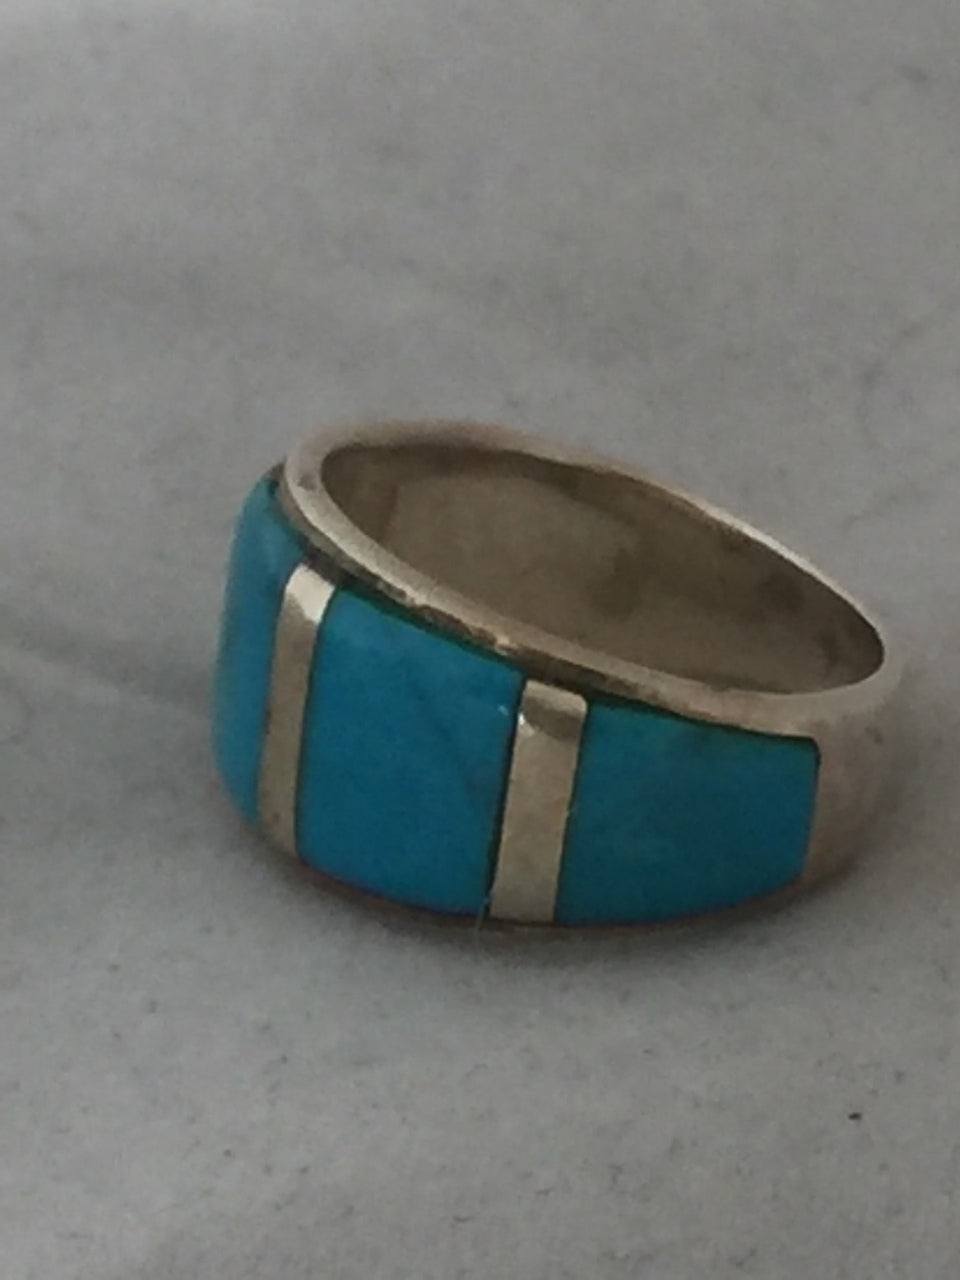 Vintage Sterling Silver Turquoise Ring Band Southwestern Tribal  Signed UA  Size 6.5  5.2g